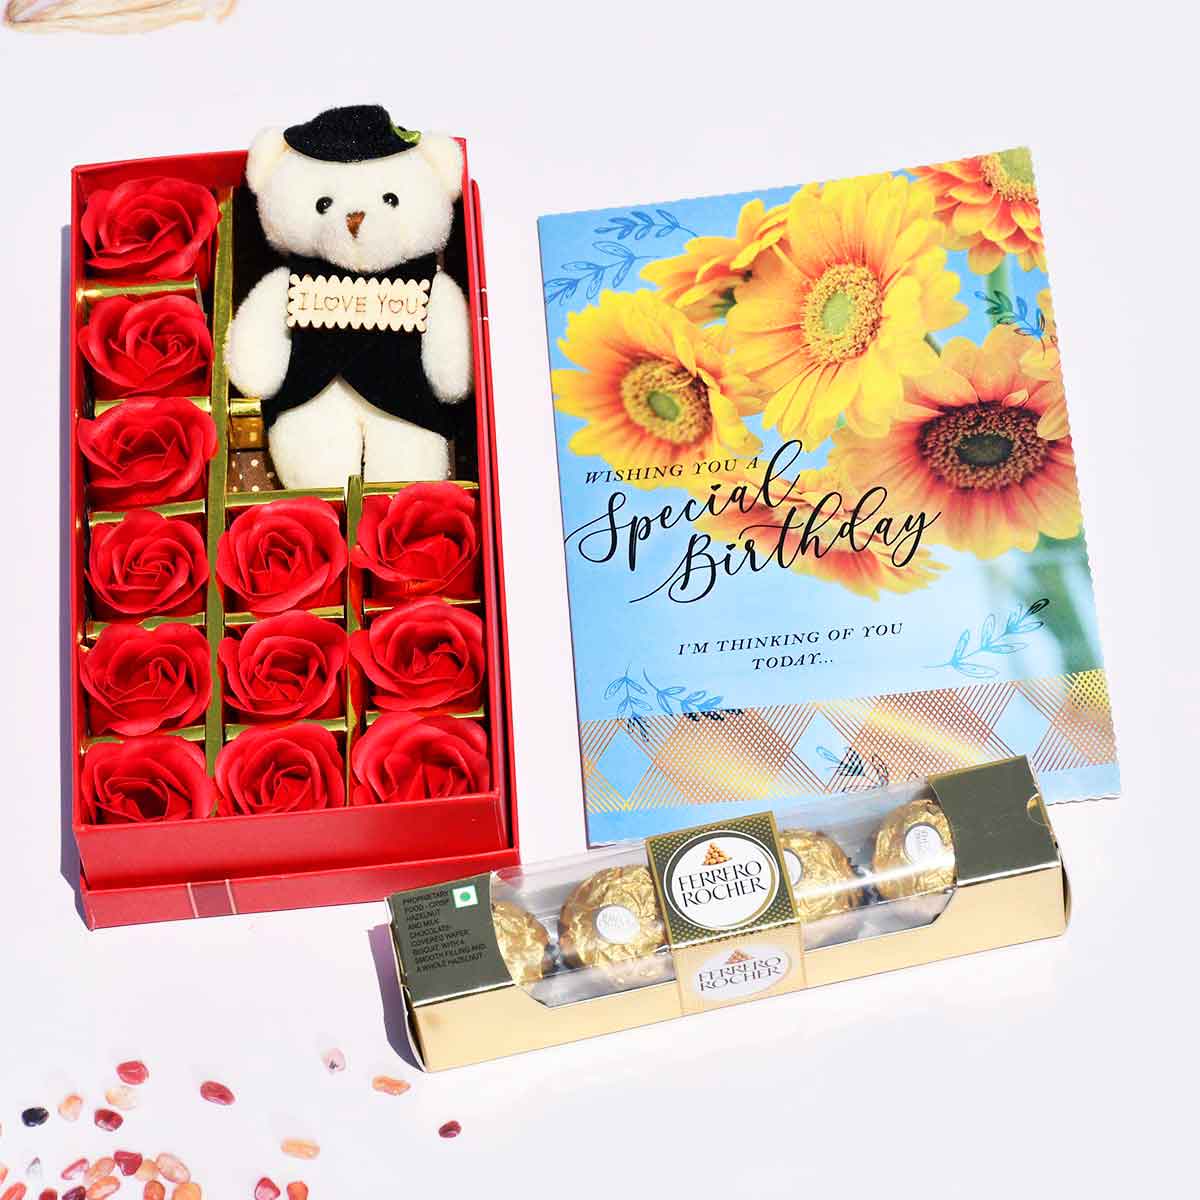 Buy Special Birthday Gifts with Card, Chocolate and Love Gift Box